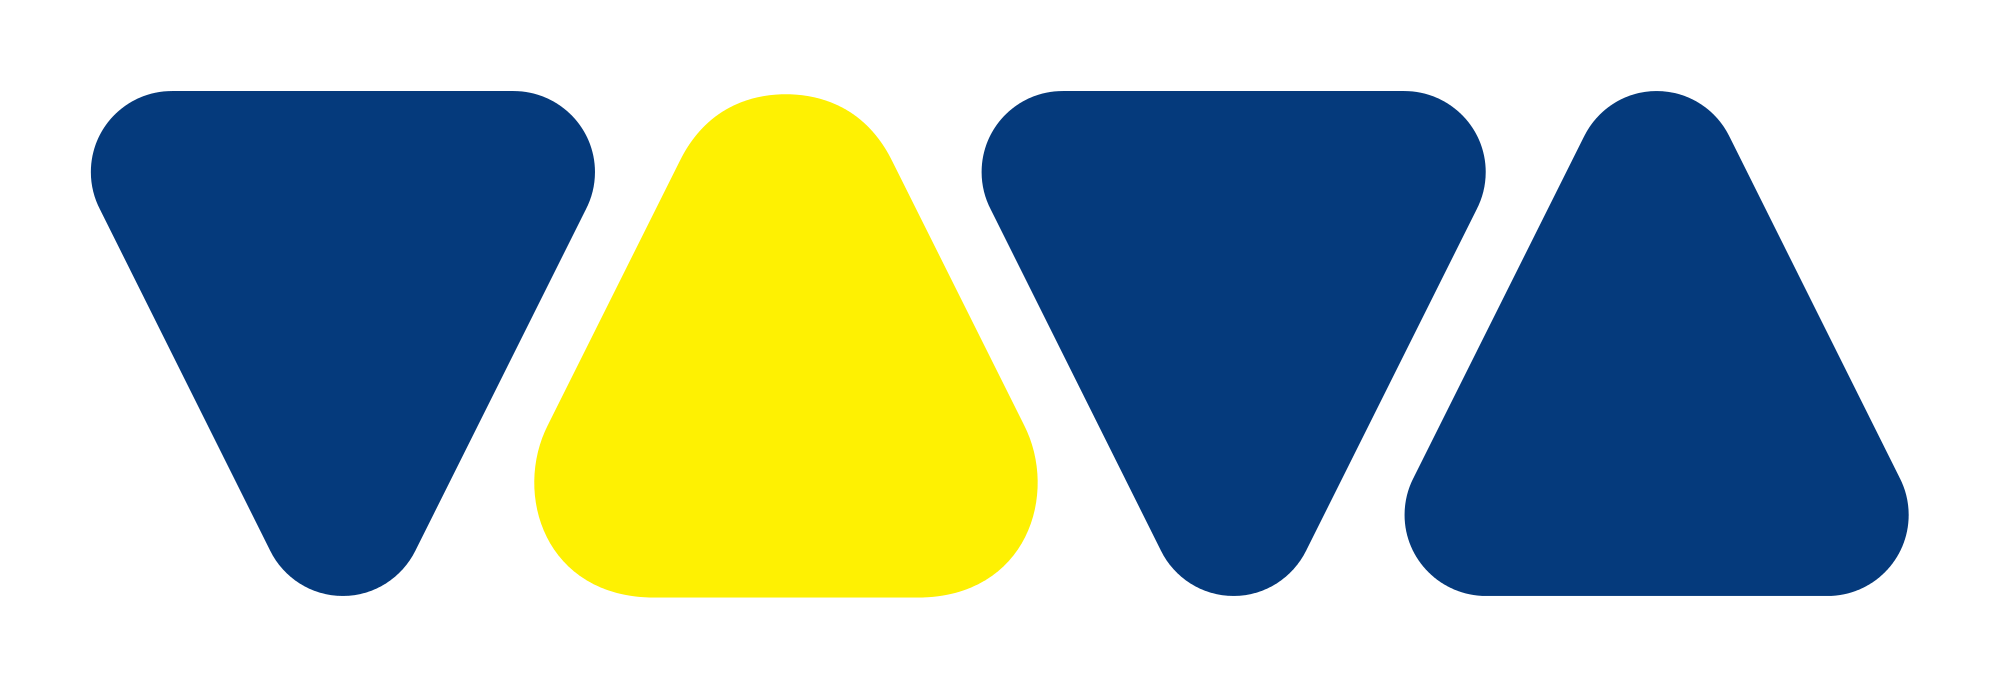 Blue and Yellow Logo - File:VIVA Logo blue-yellow solid.svg - Wikimedia Commons